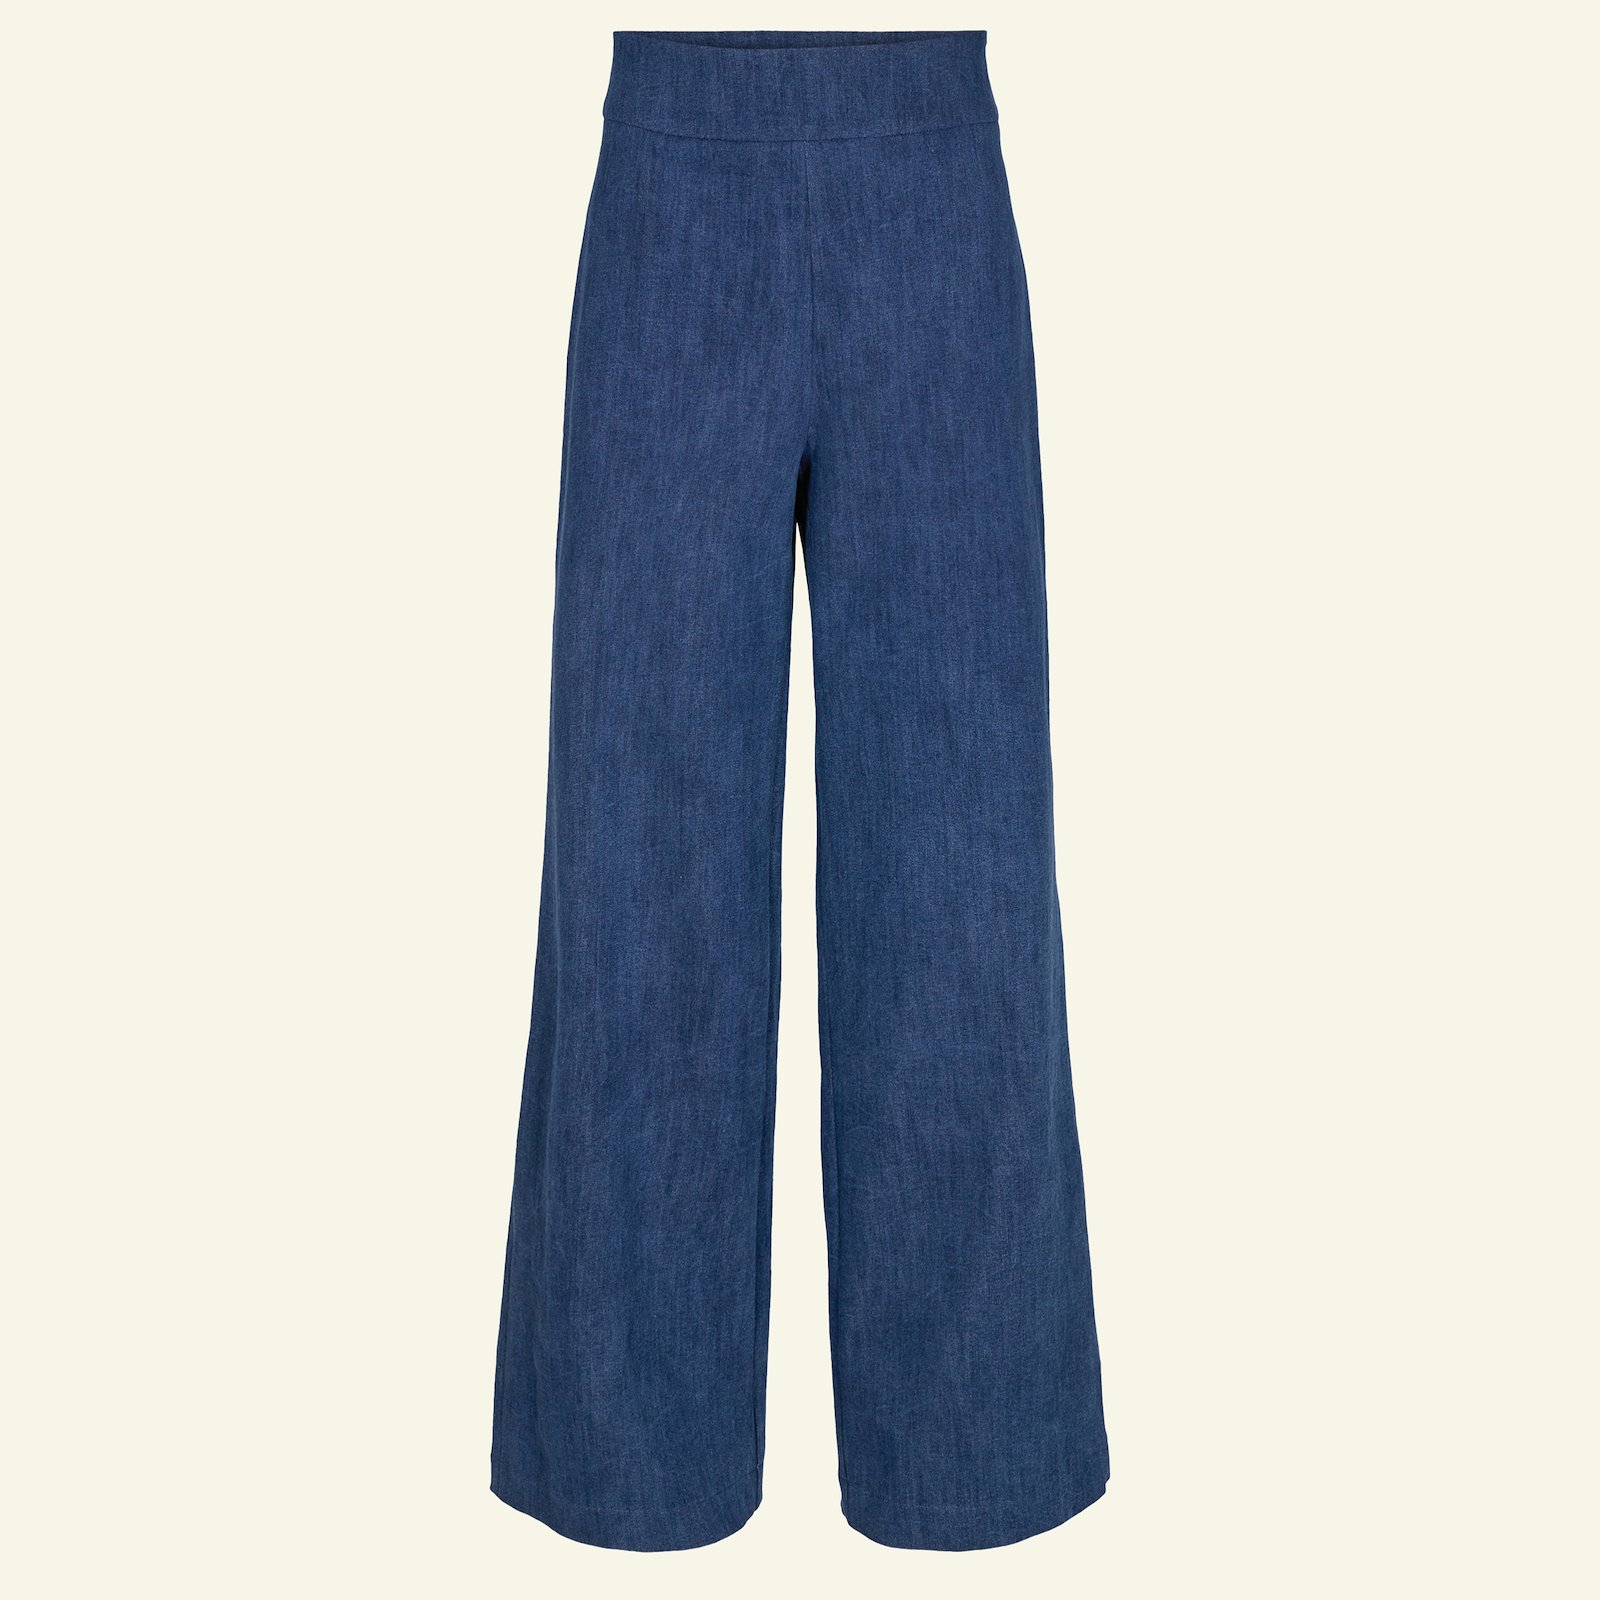 Highwaist and wide legs trousers, 40/12 p20052_460851_sskit